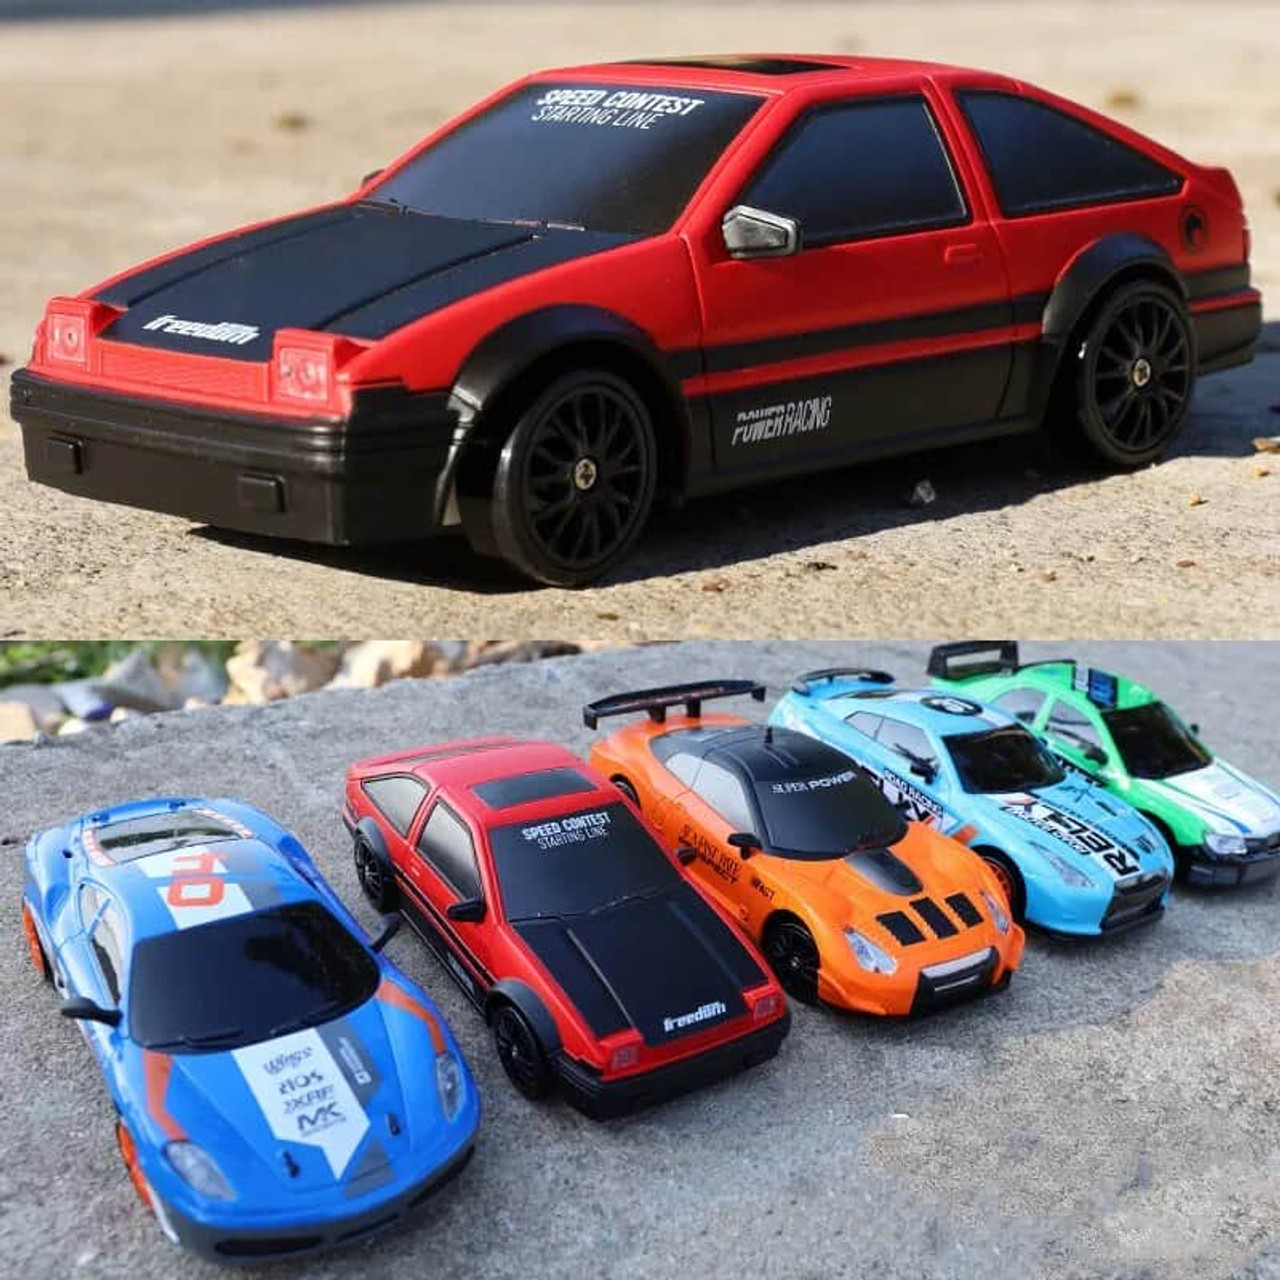 2.4G High speed Drift Rc Car 4WD Toy Remote Control AE86 Model GTR Vehicle Car RC Racing Cars Toy for Children Christmas Gifts